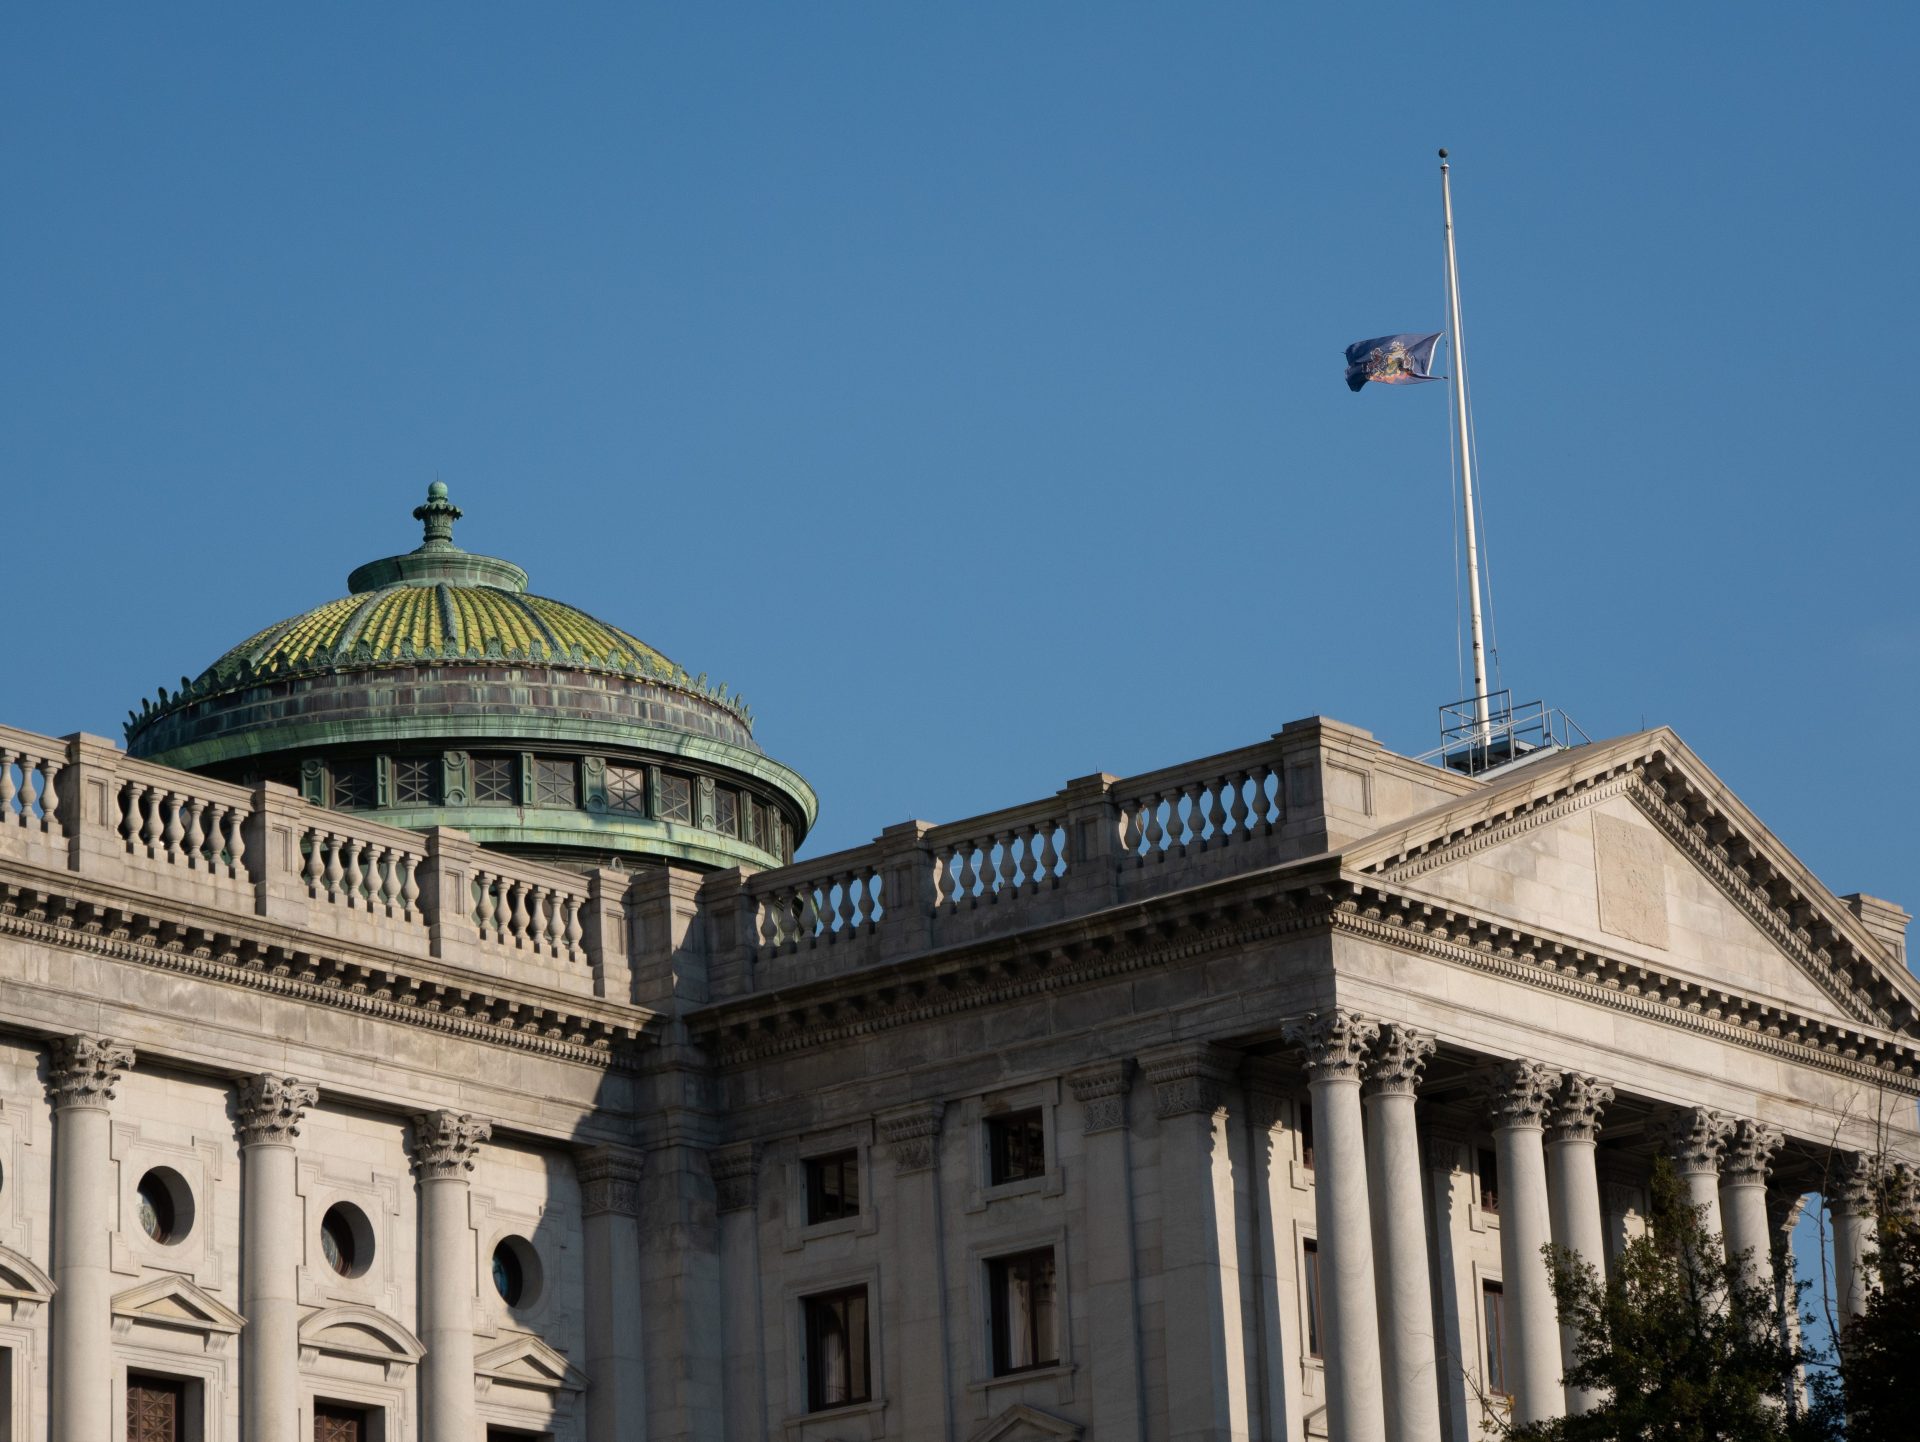 The Pennsylvania state flag flies at half-mast atop the capitol building on Oct. 31, 2018.